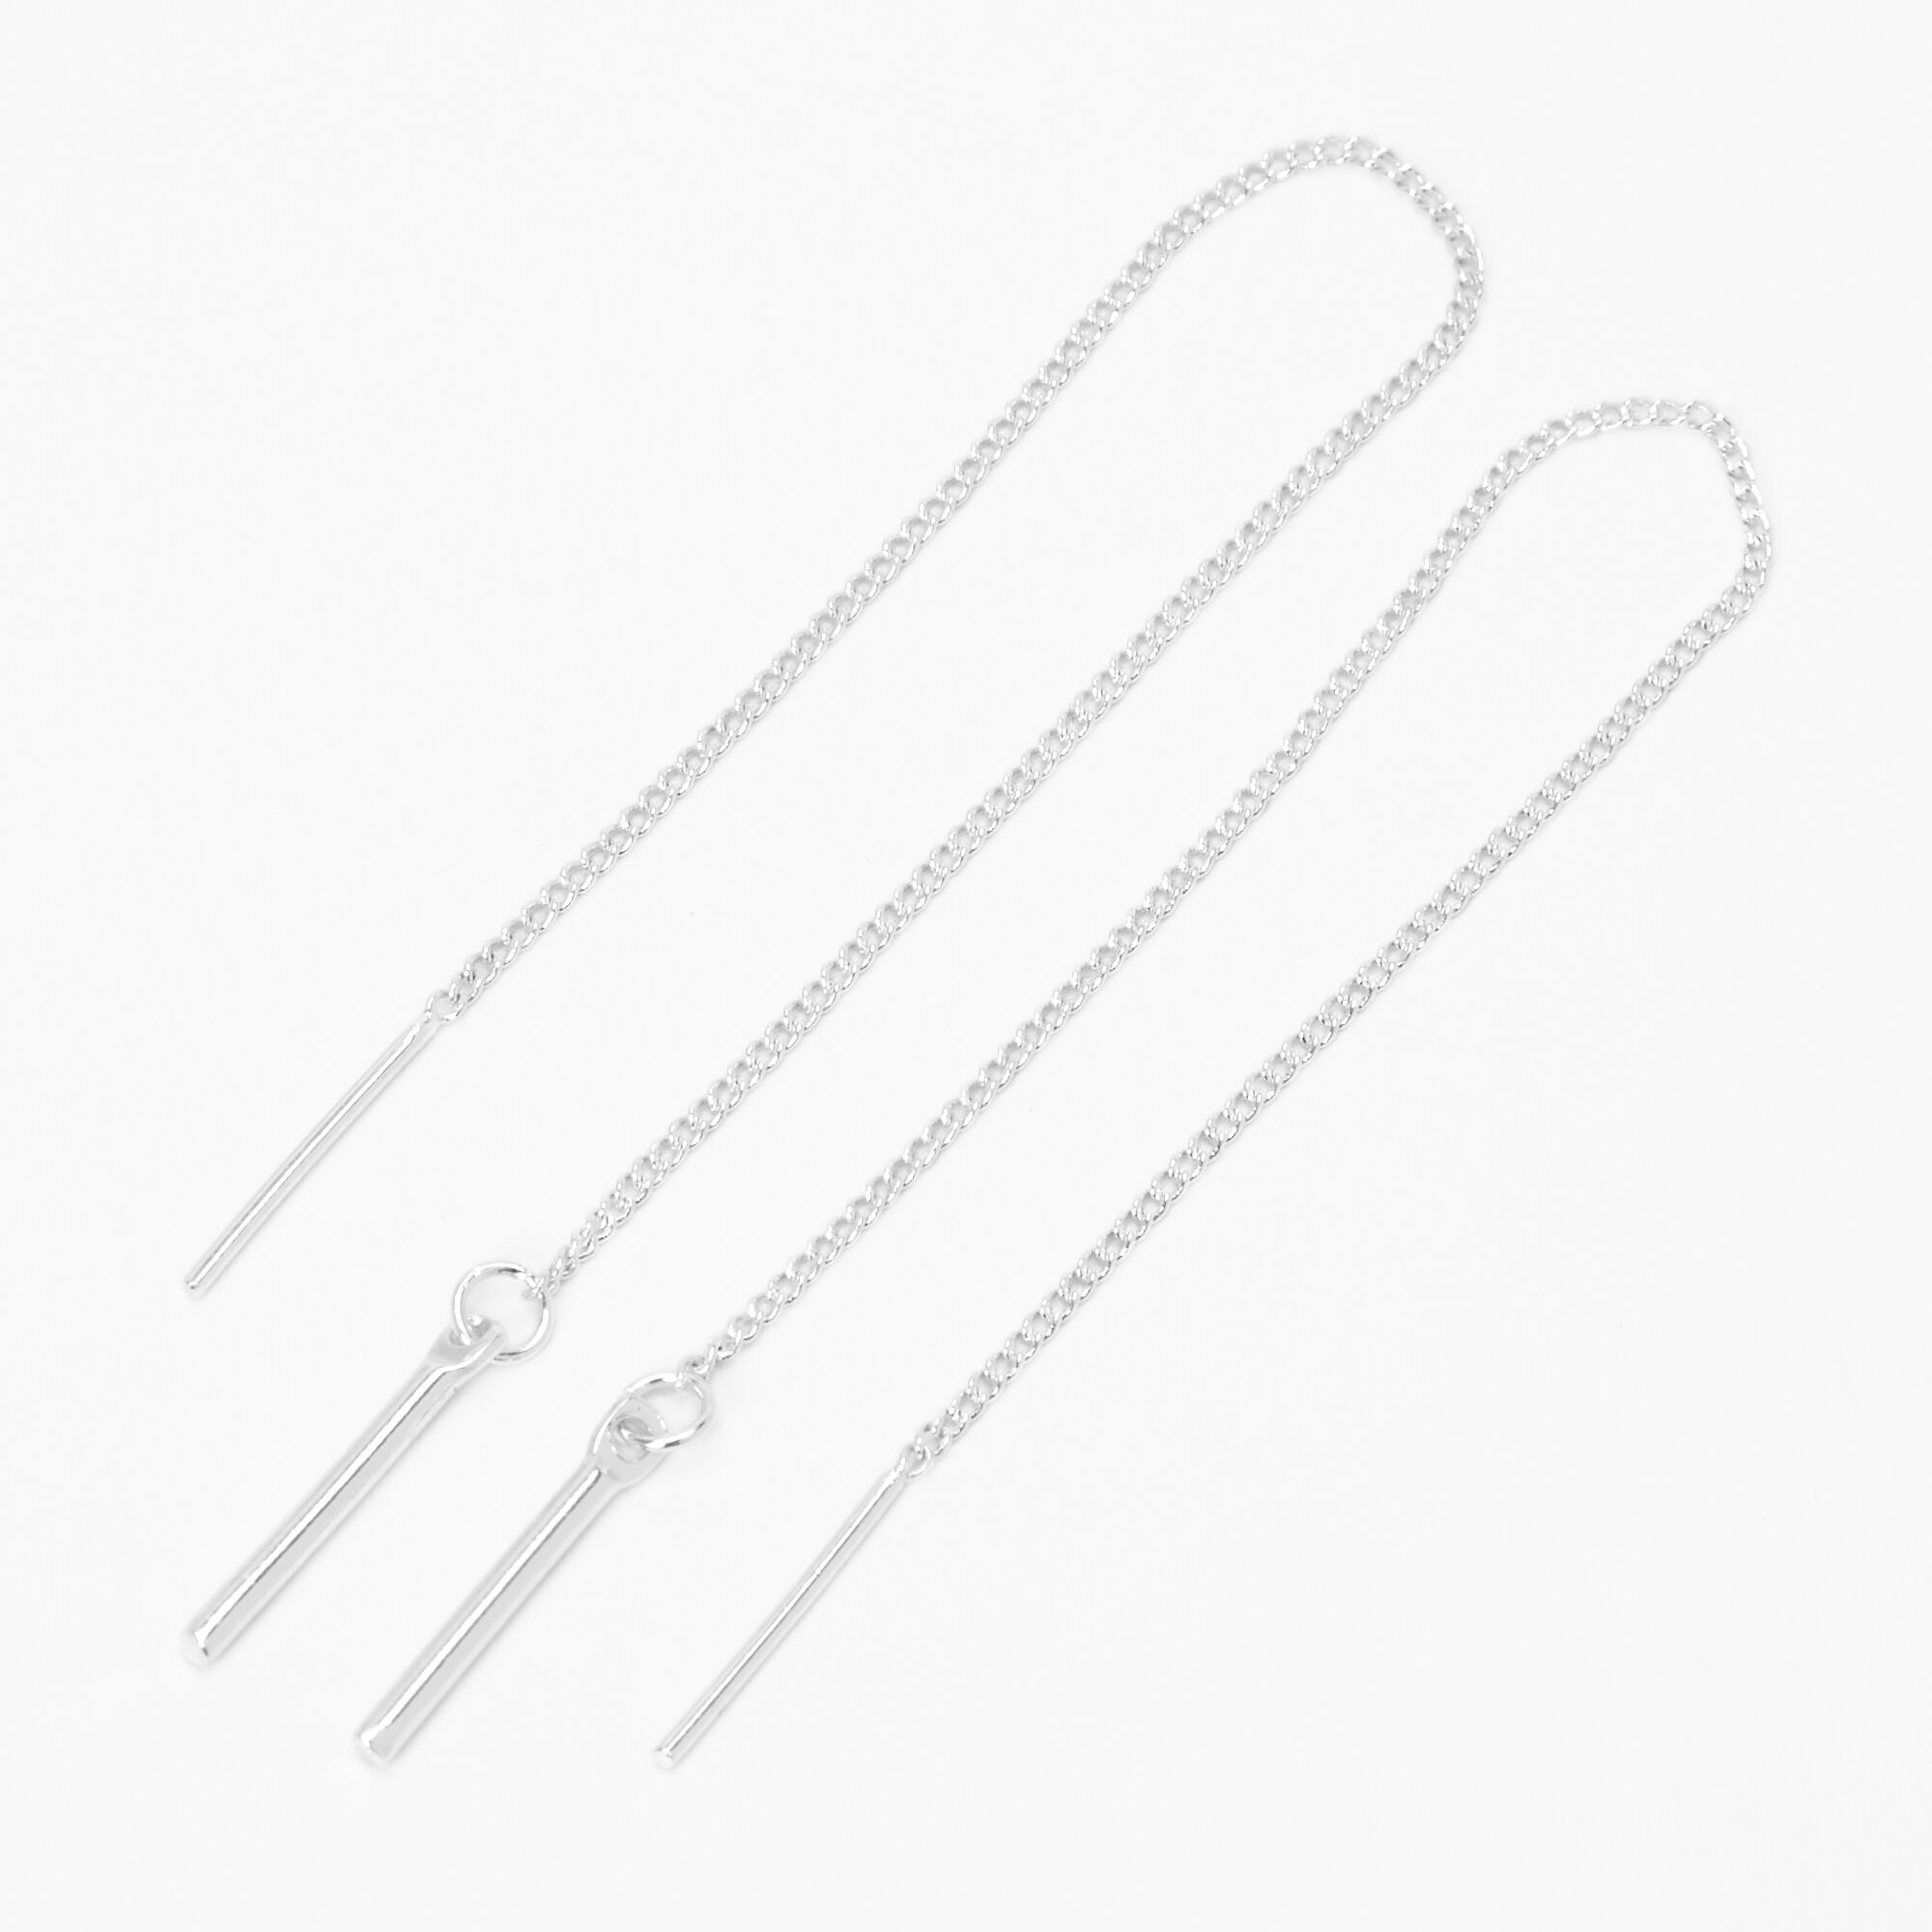 View Claires Tone 4 Linear Bar Threader Drop Earrings Silver information